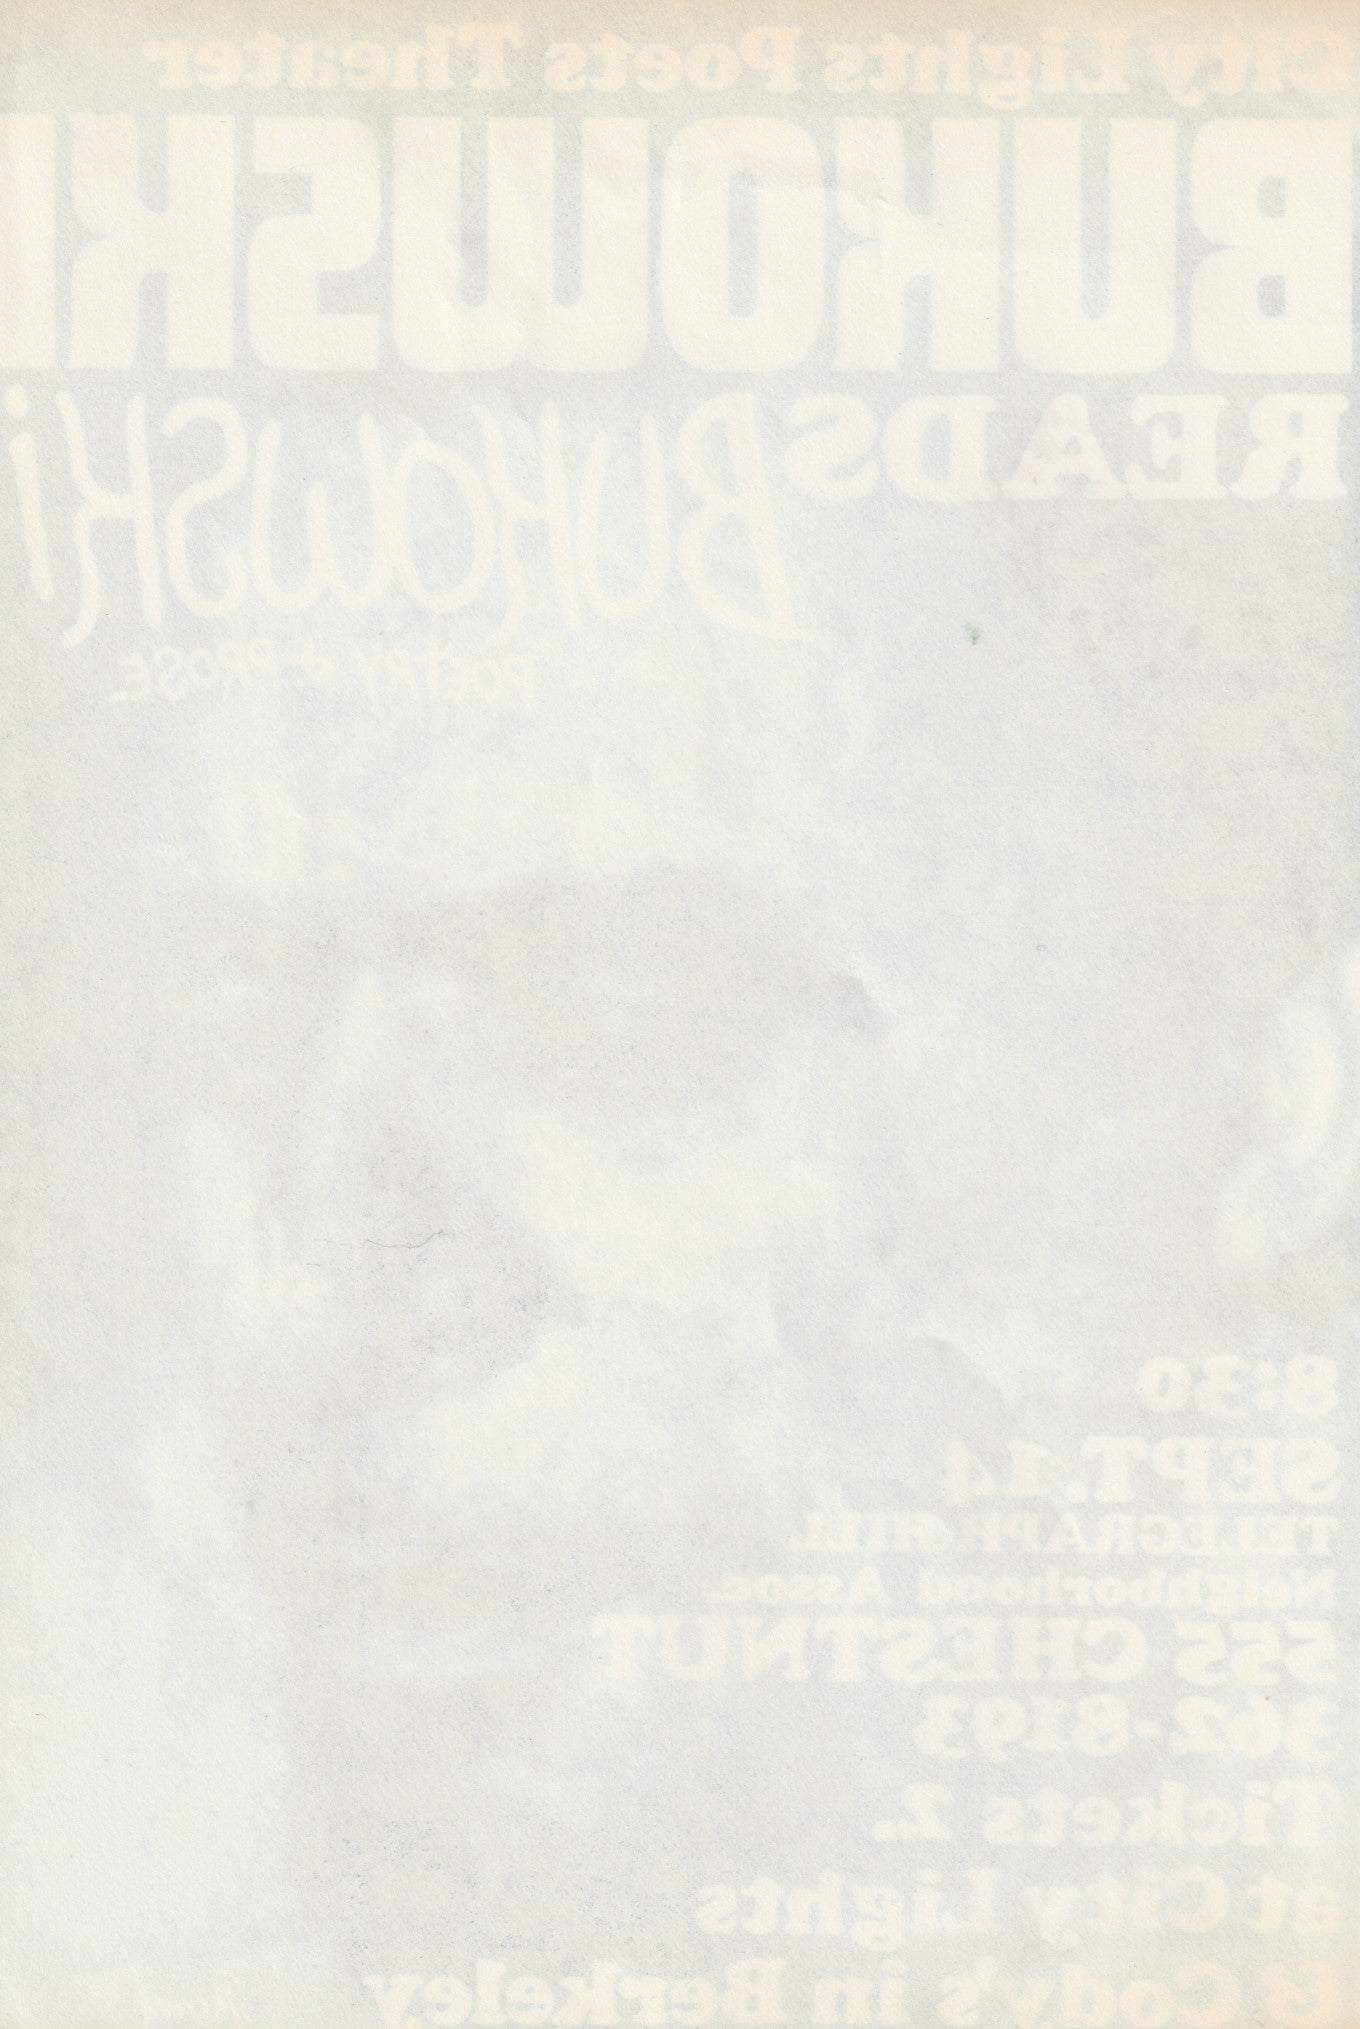 Flyer for 1973 Bukowski Reading at City Lights Poets Theater